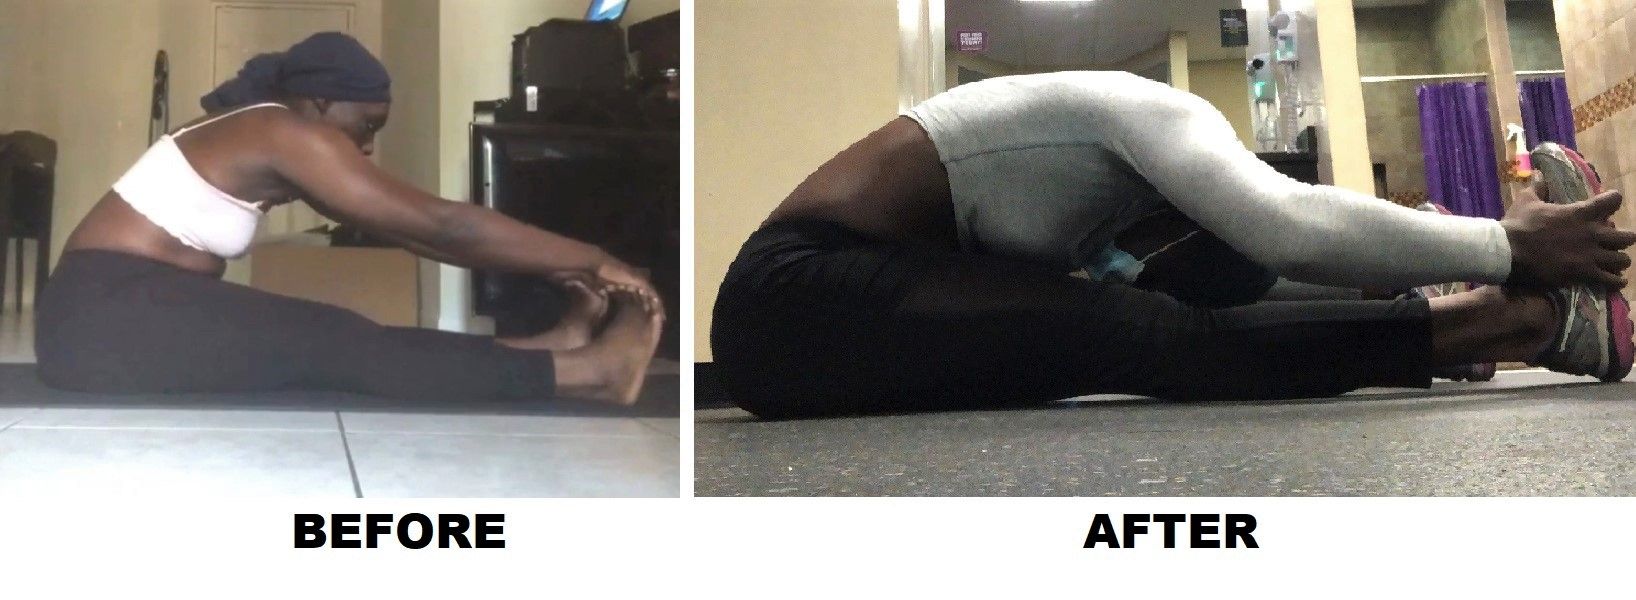 Increased flexibility of hamstrings able to touch toes now